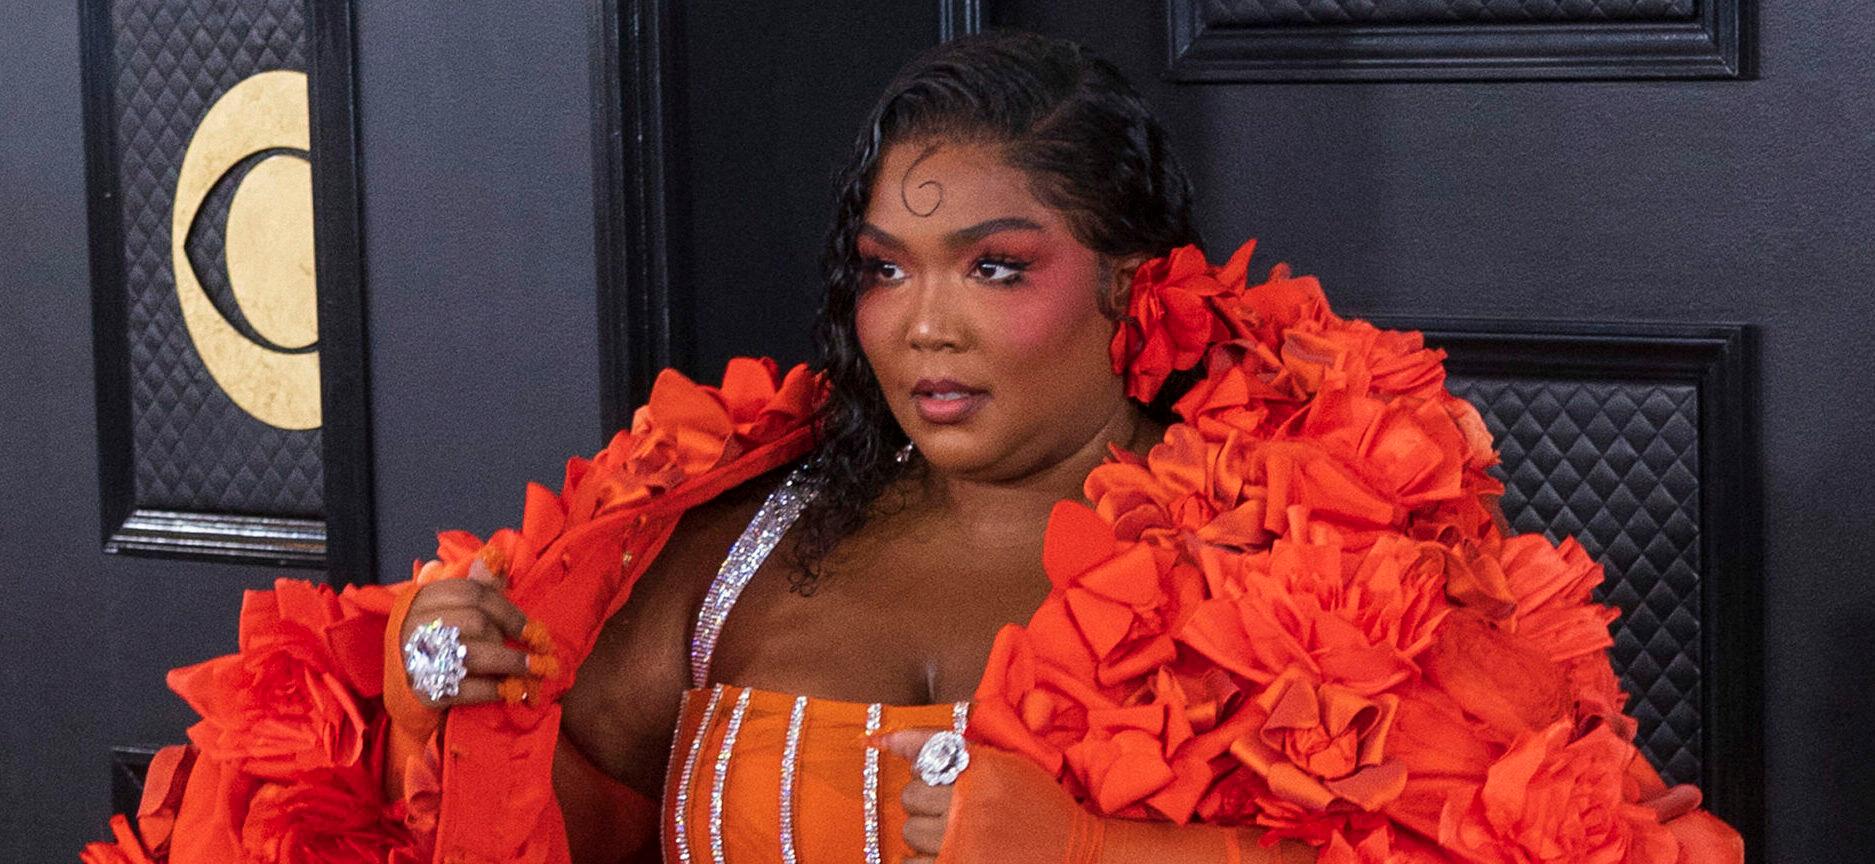 Lizzo at the 65th Grammy Awards - Arrivals